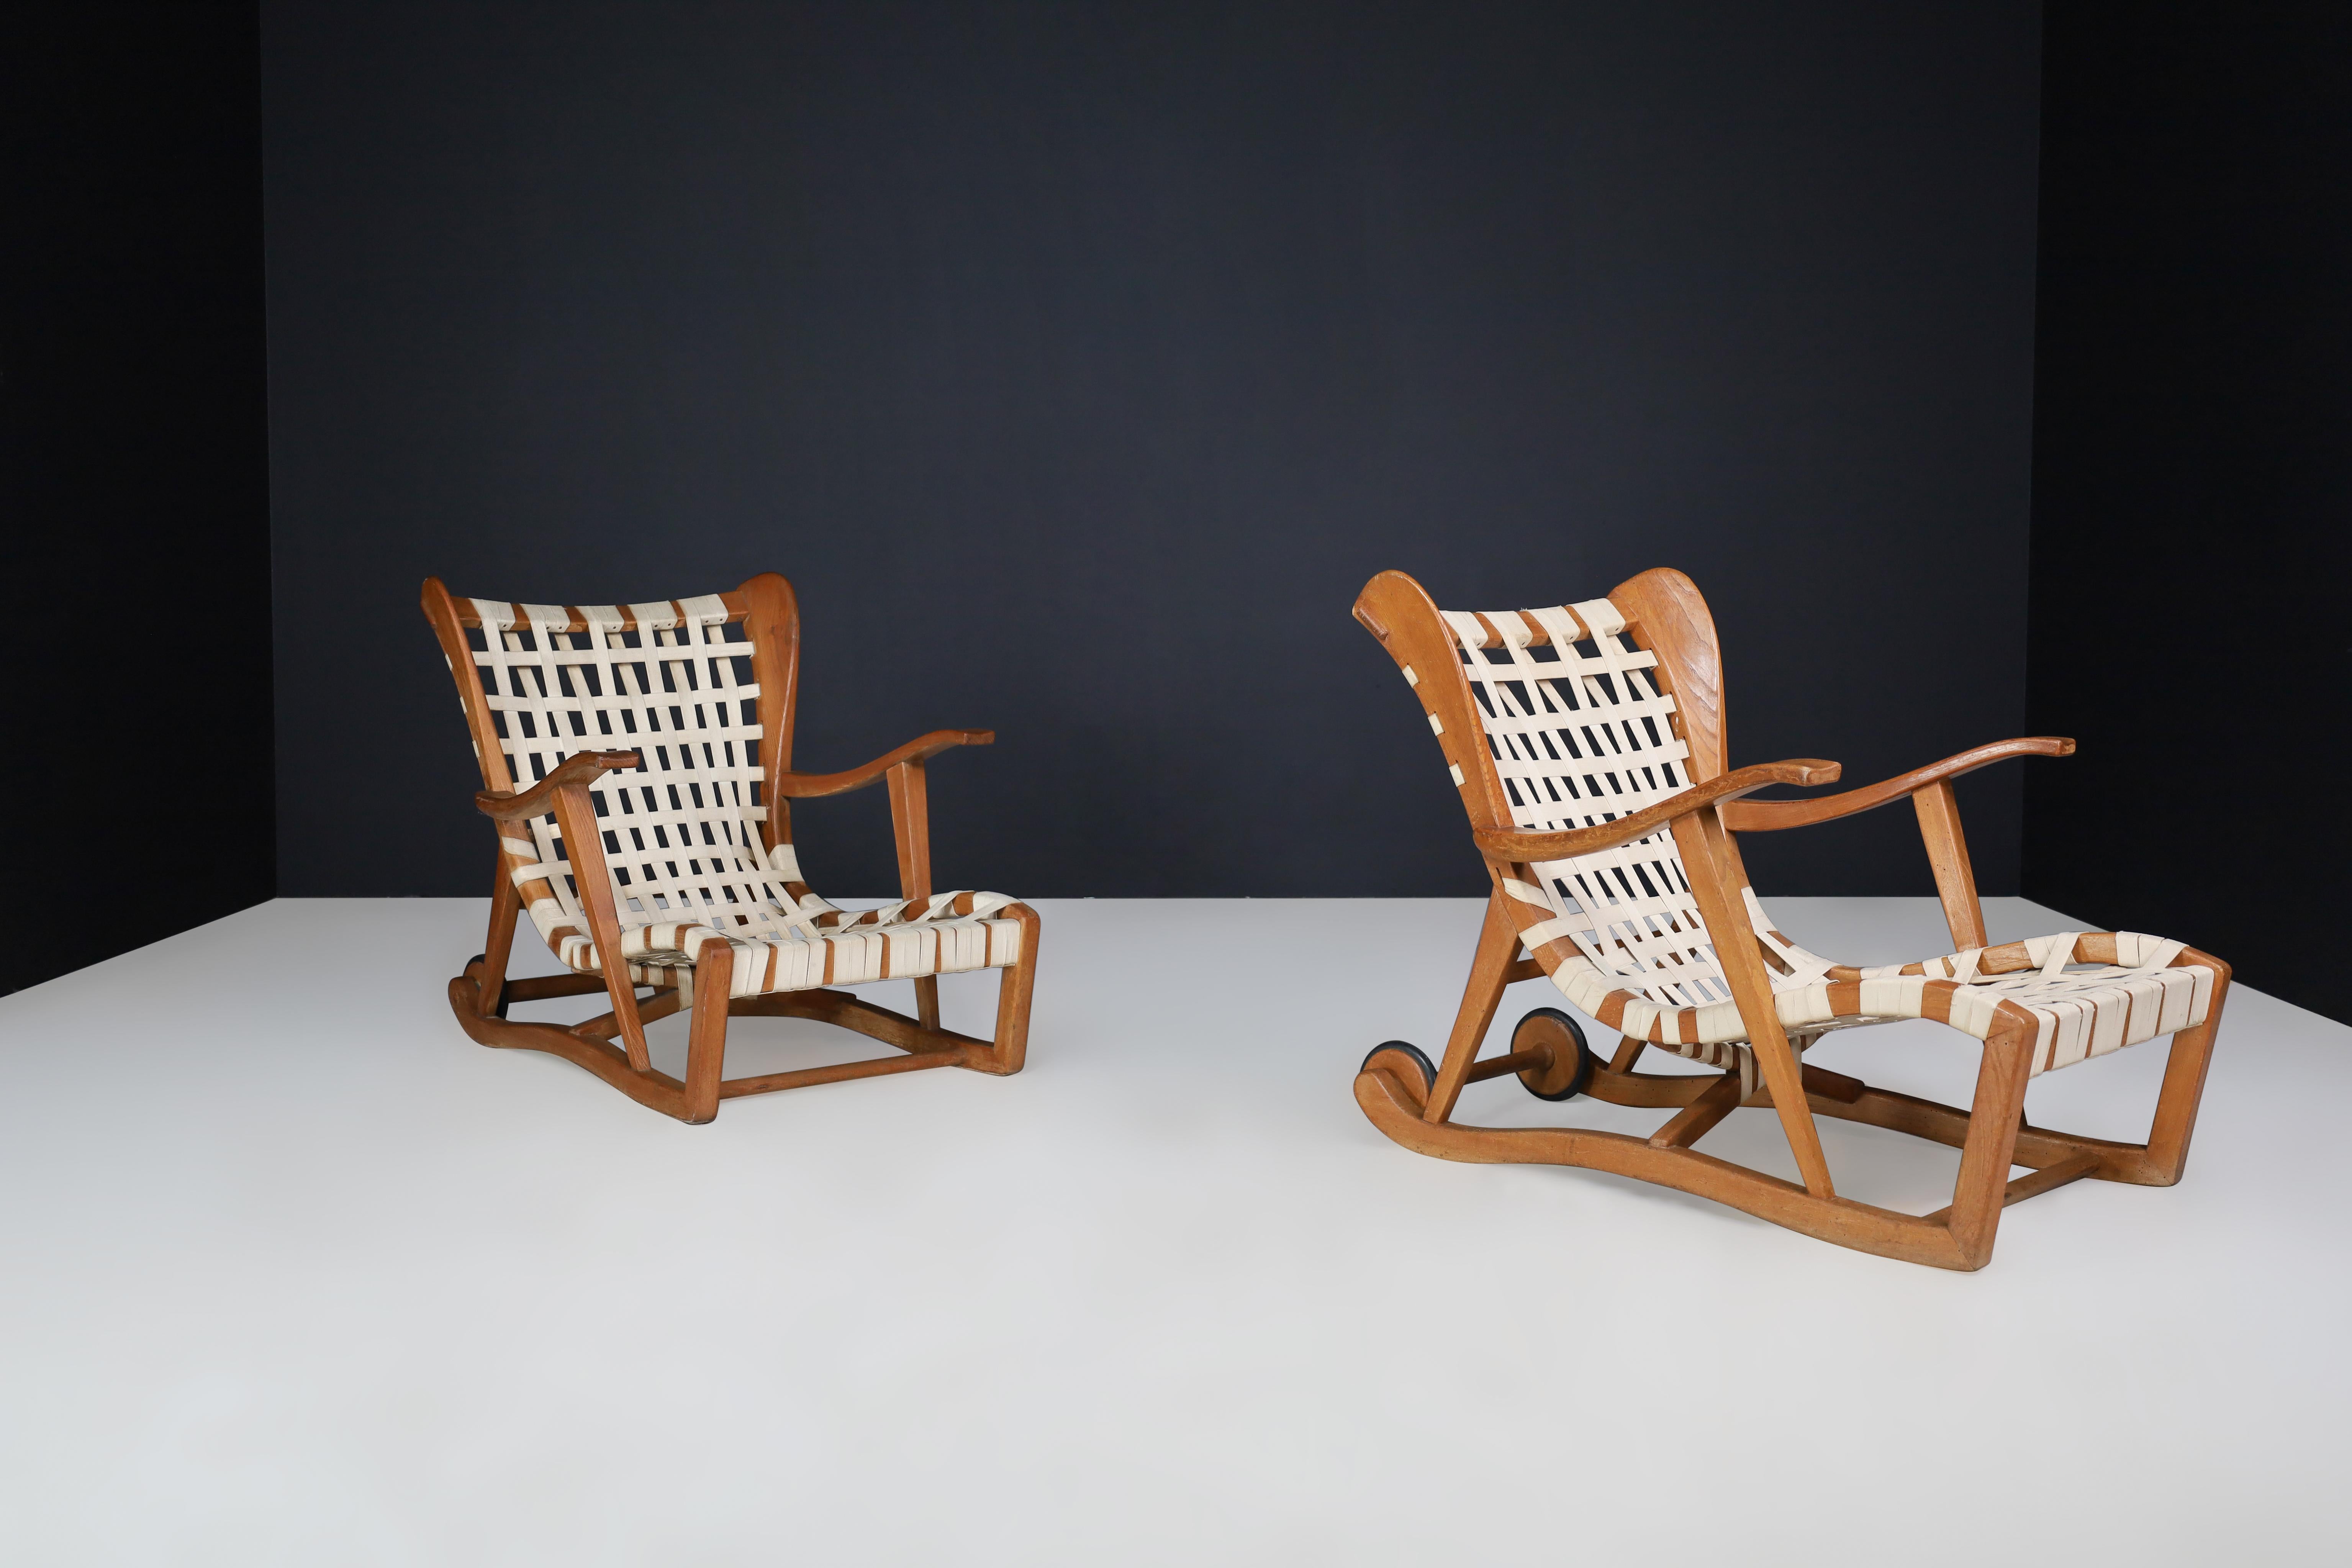 Linen Sculptural oak Lounge chairs by Guglielmo Pecorini, Italy, the 1950s   For Sale